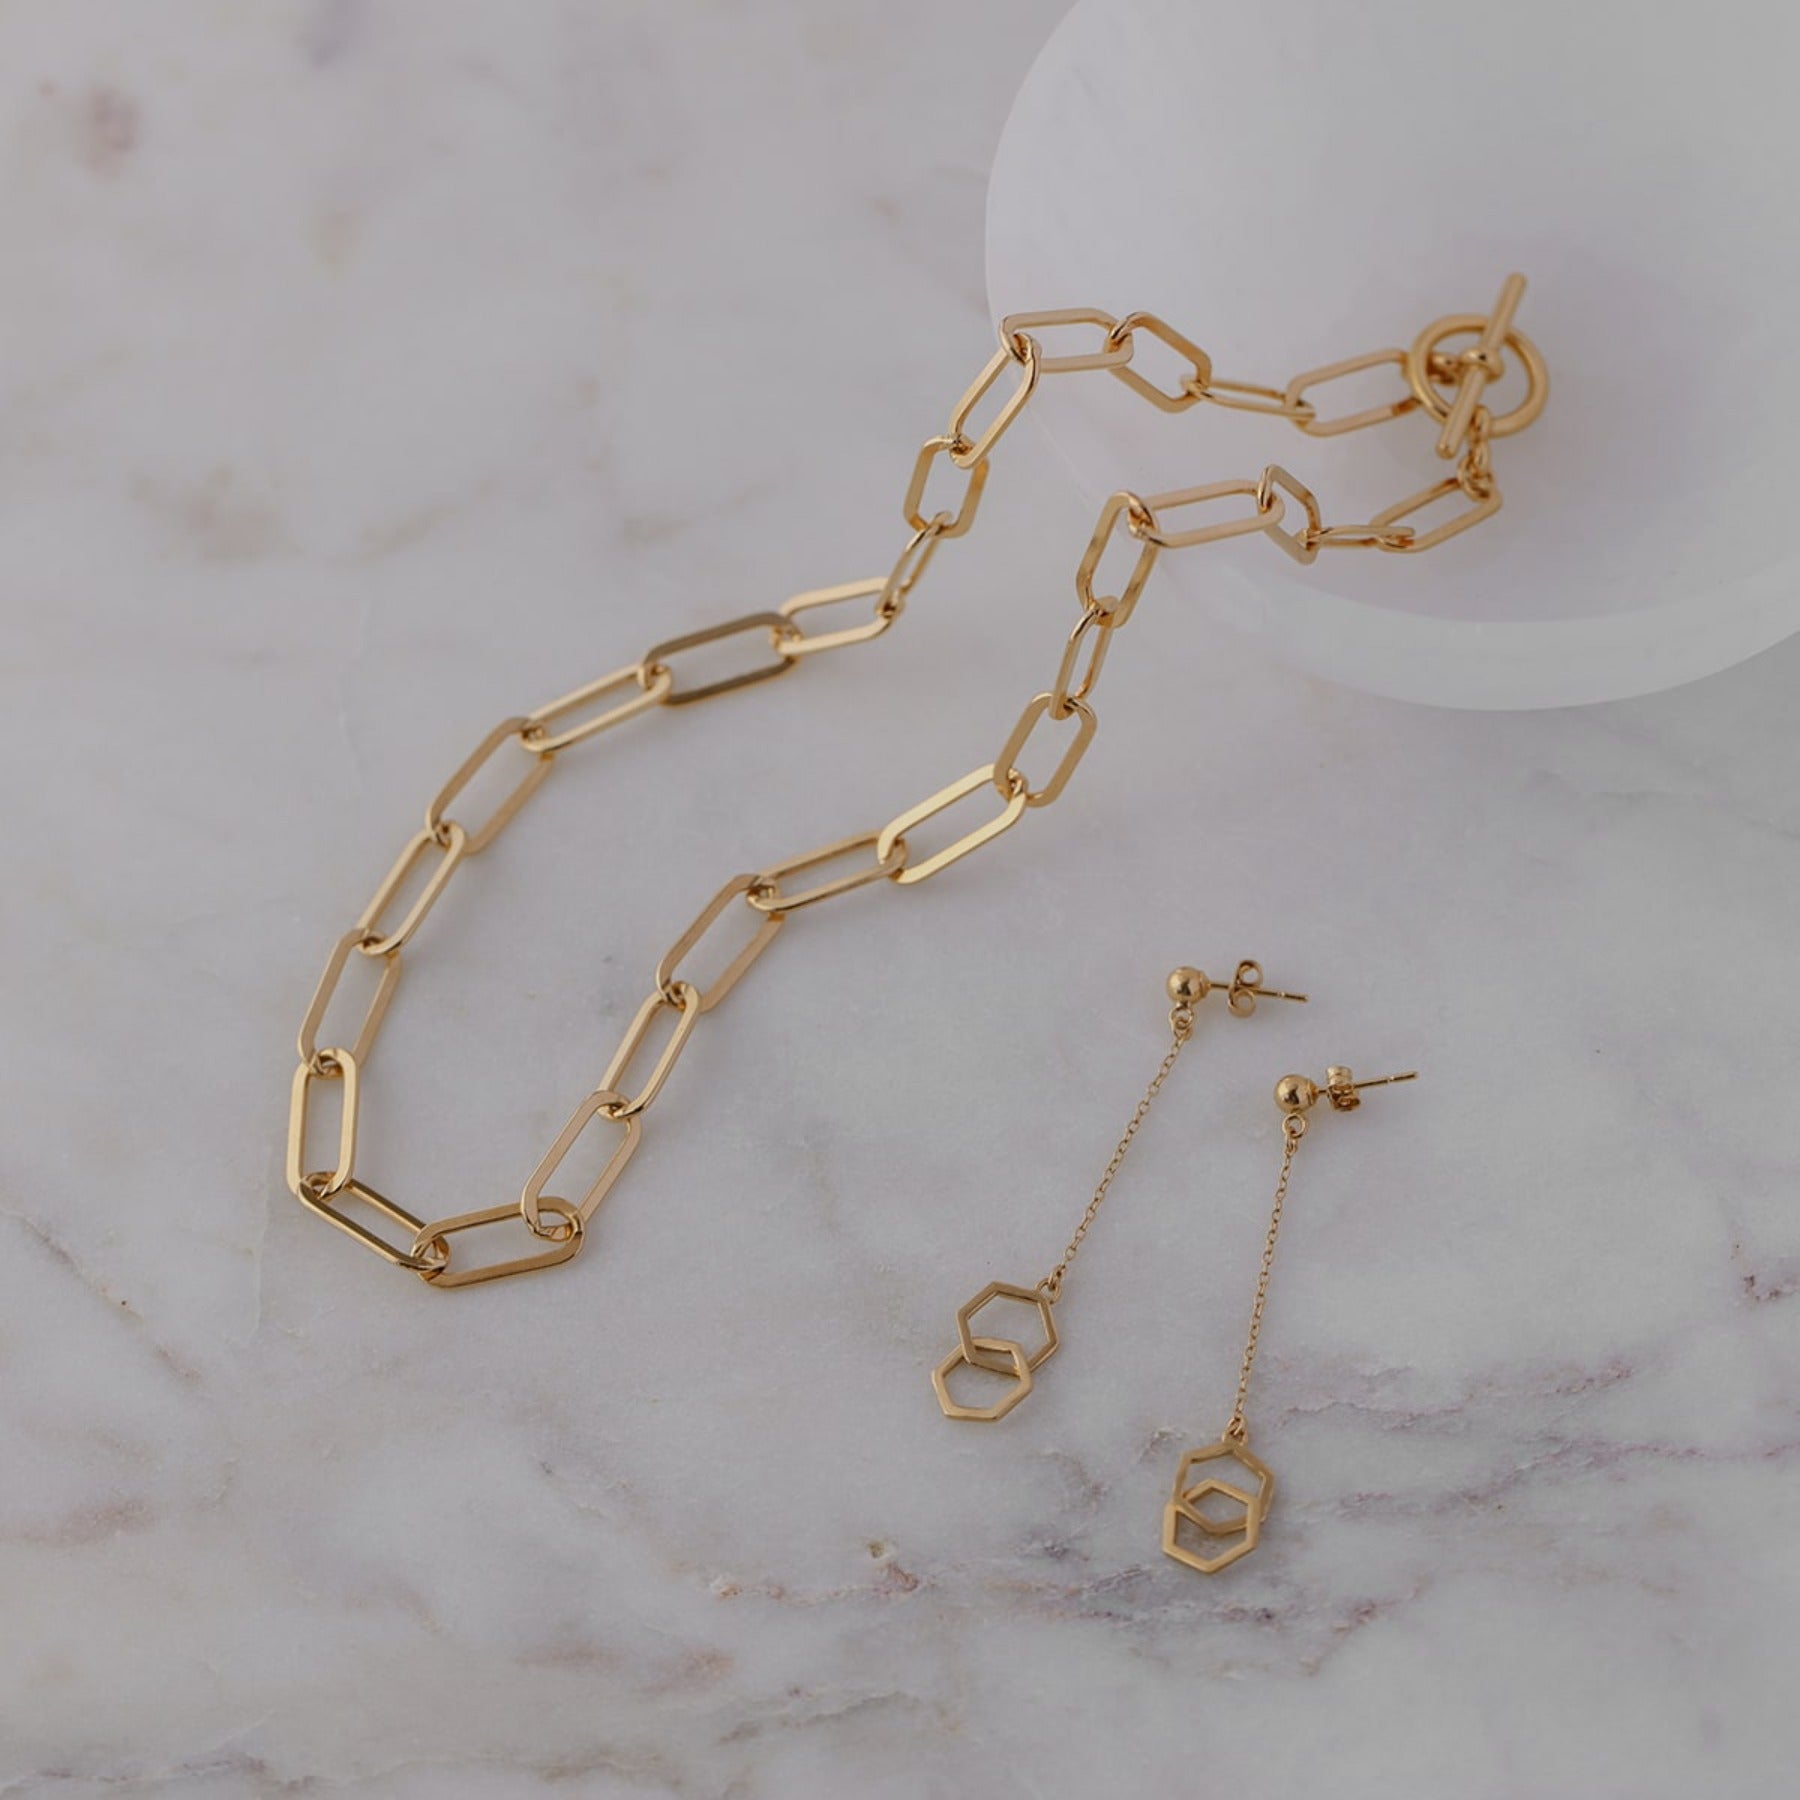 Elongated flattened paperclip chain necklace with a toggle clasp in 18k gold vermeil.